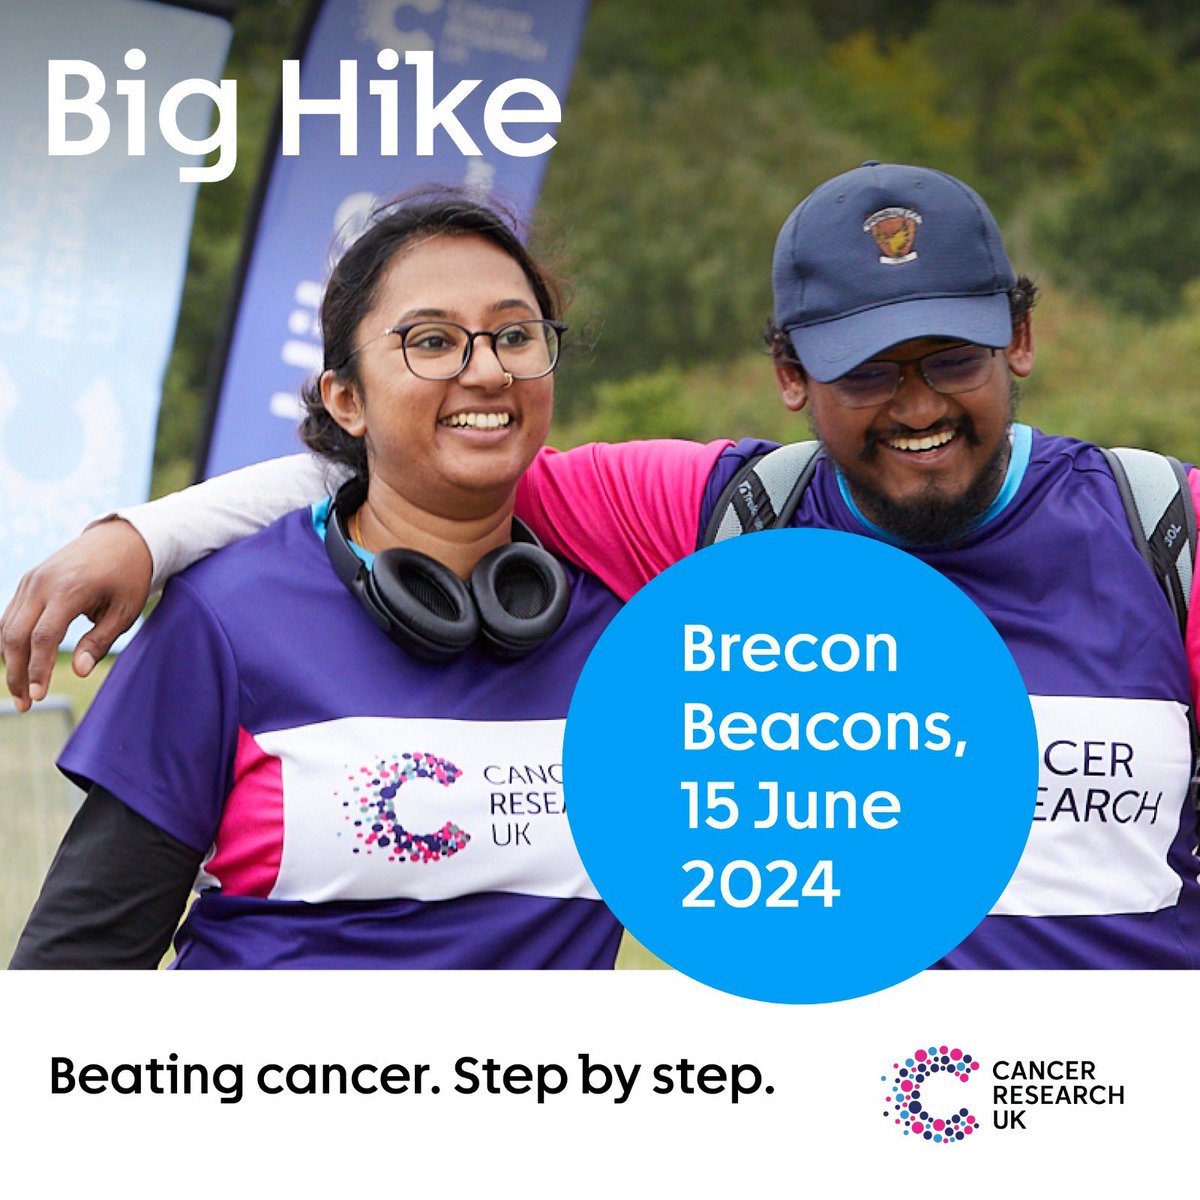 AD | Walk your 10k, half or full marathon and take in stunning scenery of the Brecon Beacons at Cancer Research UK’s Big Hike on Saturday 15 June 2024 🚶 Sign up here: cancerresearchuk.org/get-involved/f… #CancerResearchUK #CancerResearchUKBigHike